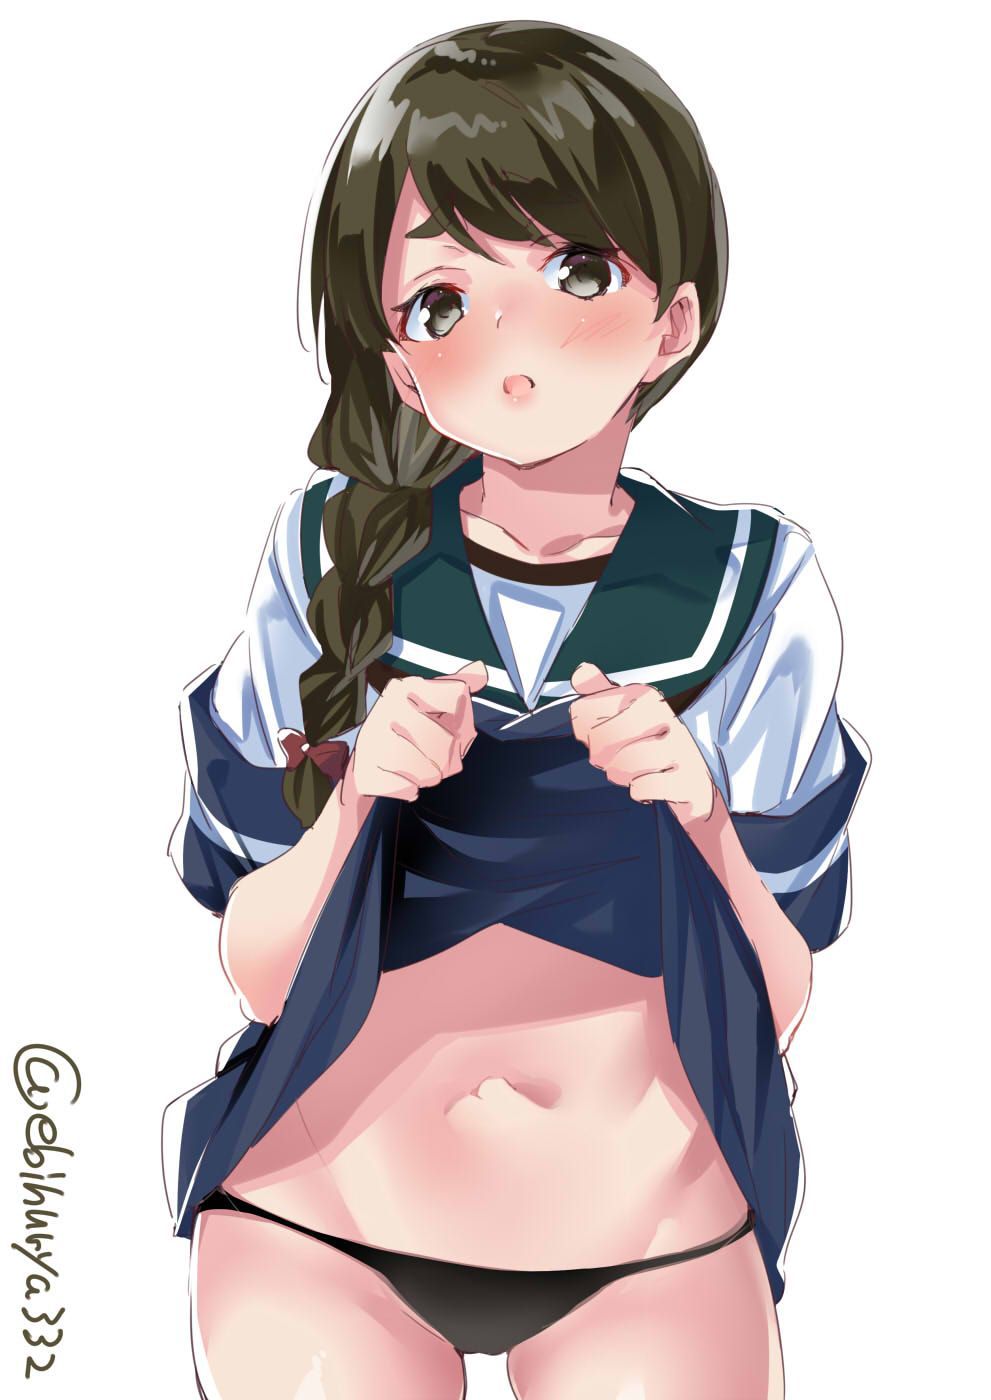 Kantai Photo Gallery people want to see! 8